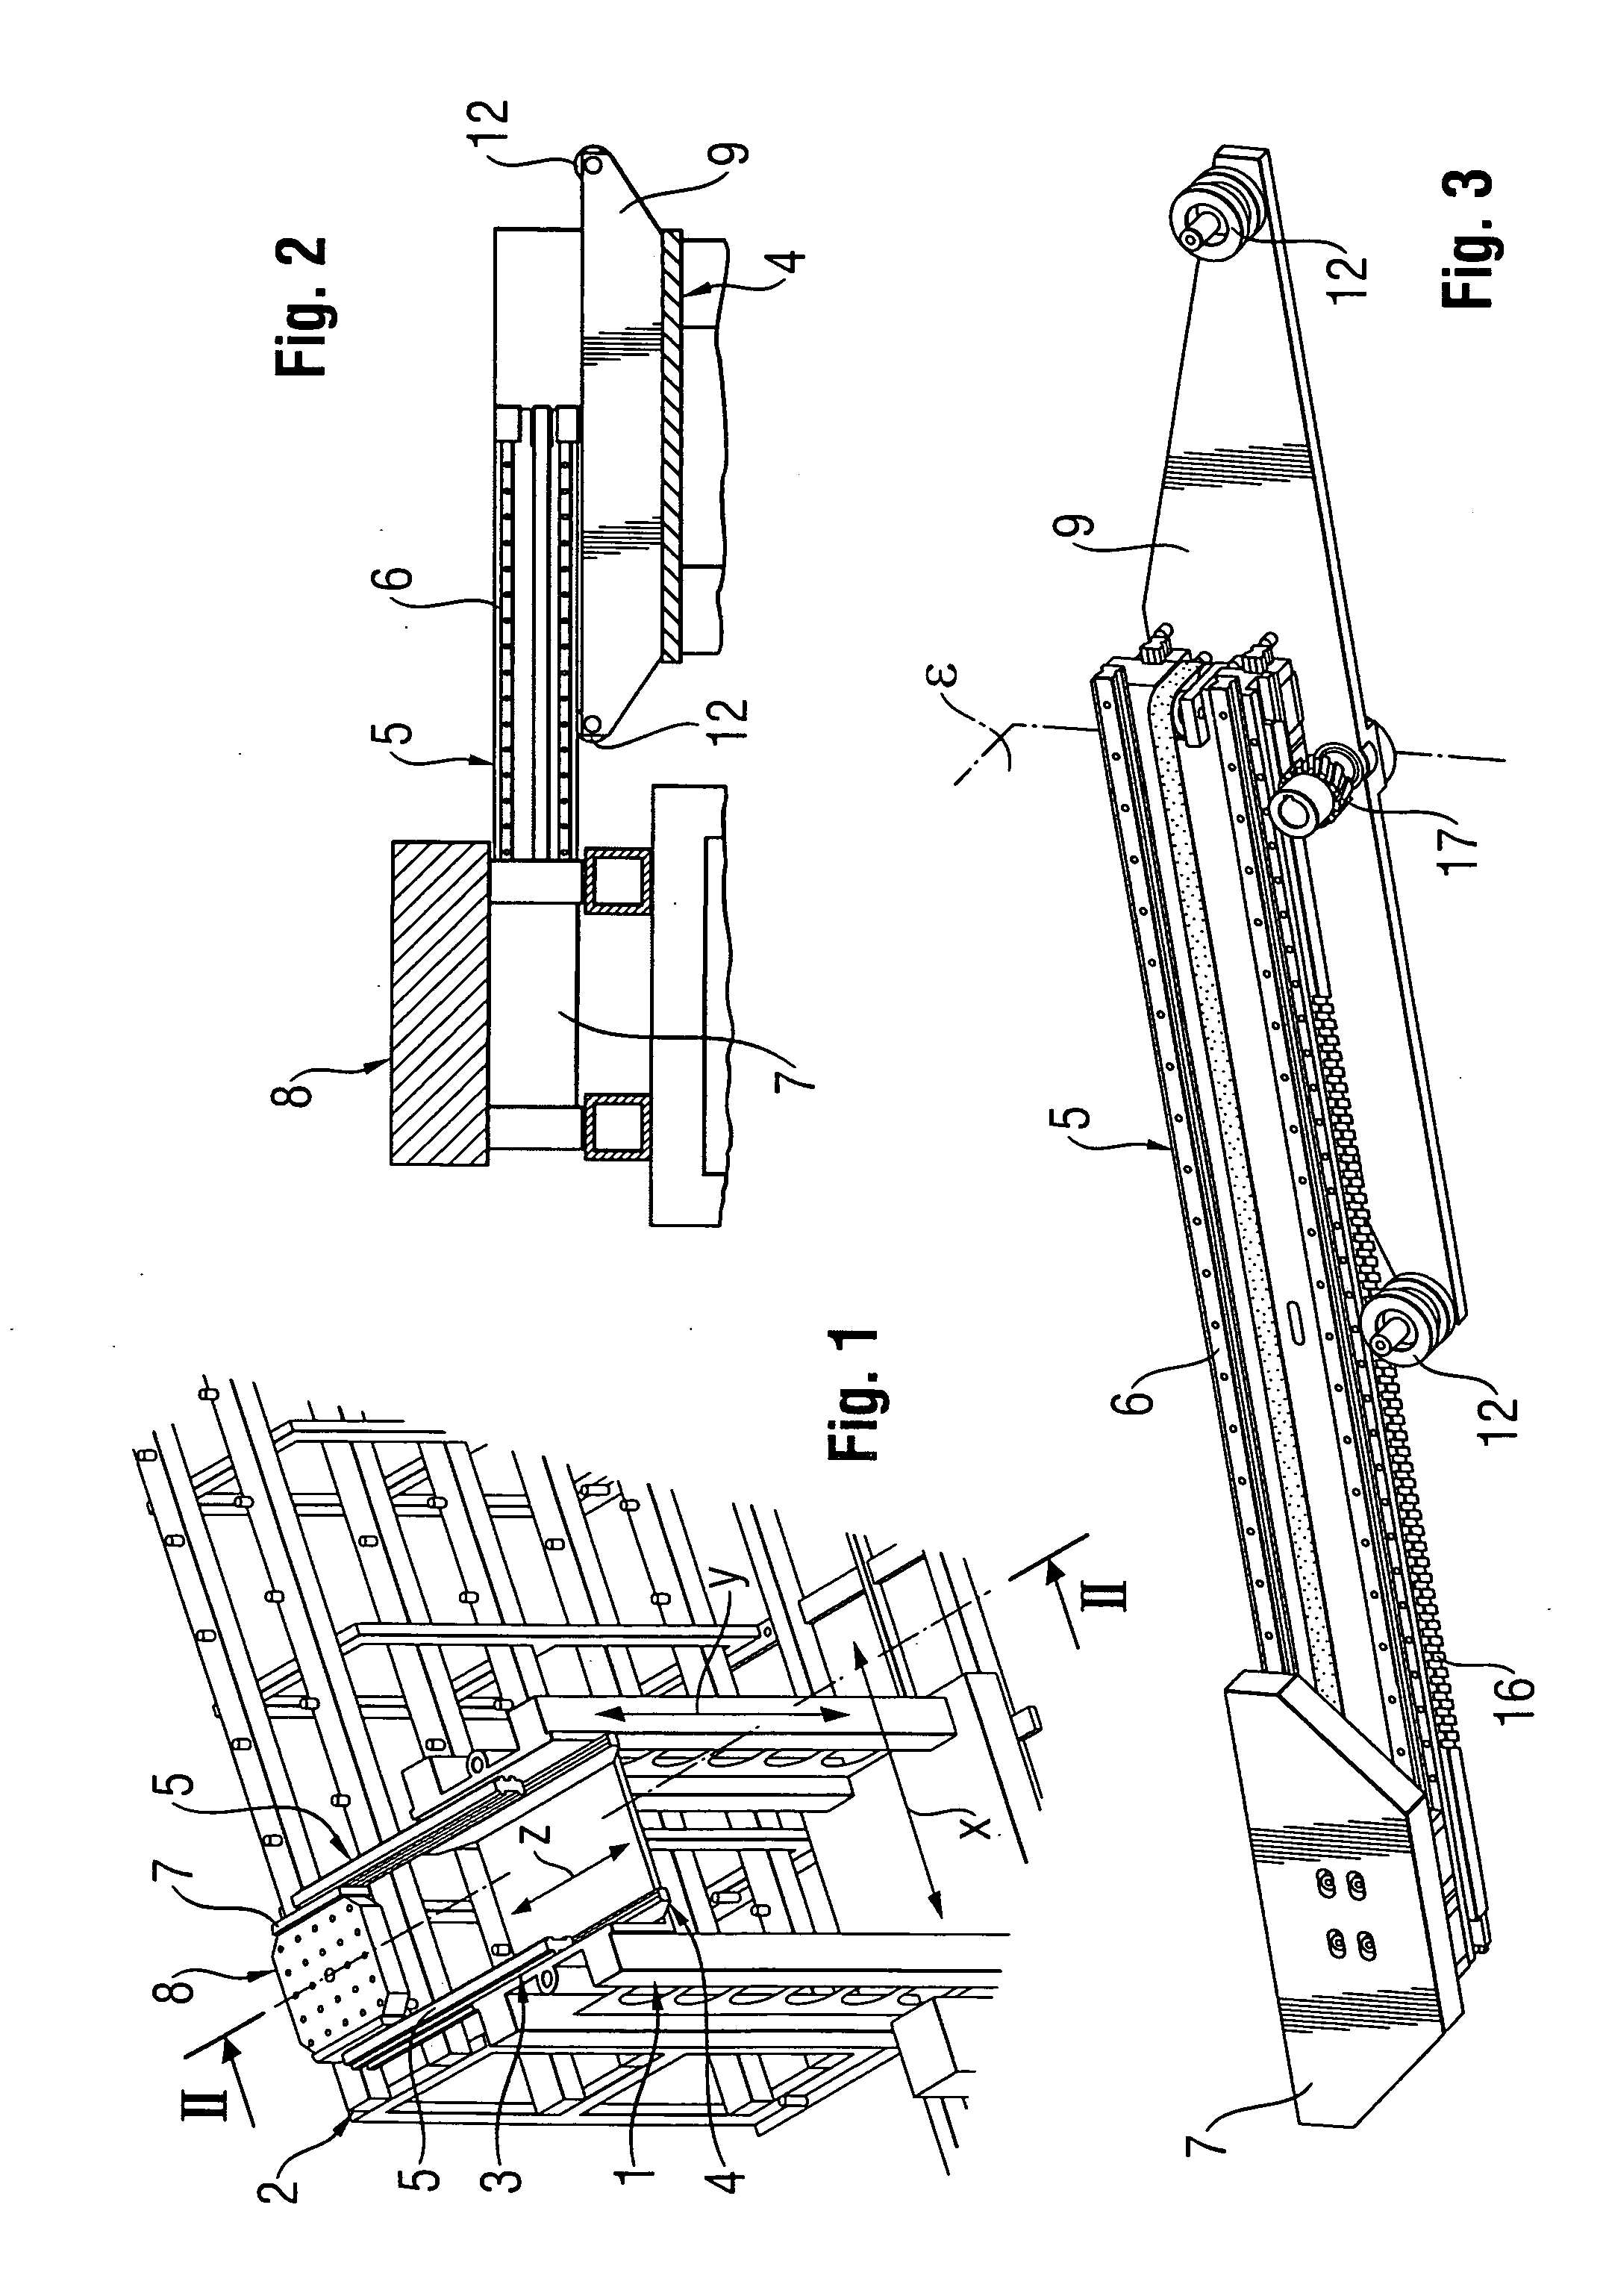 Manipulation device for loading and unloading a shelf